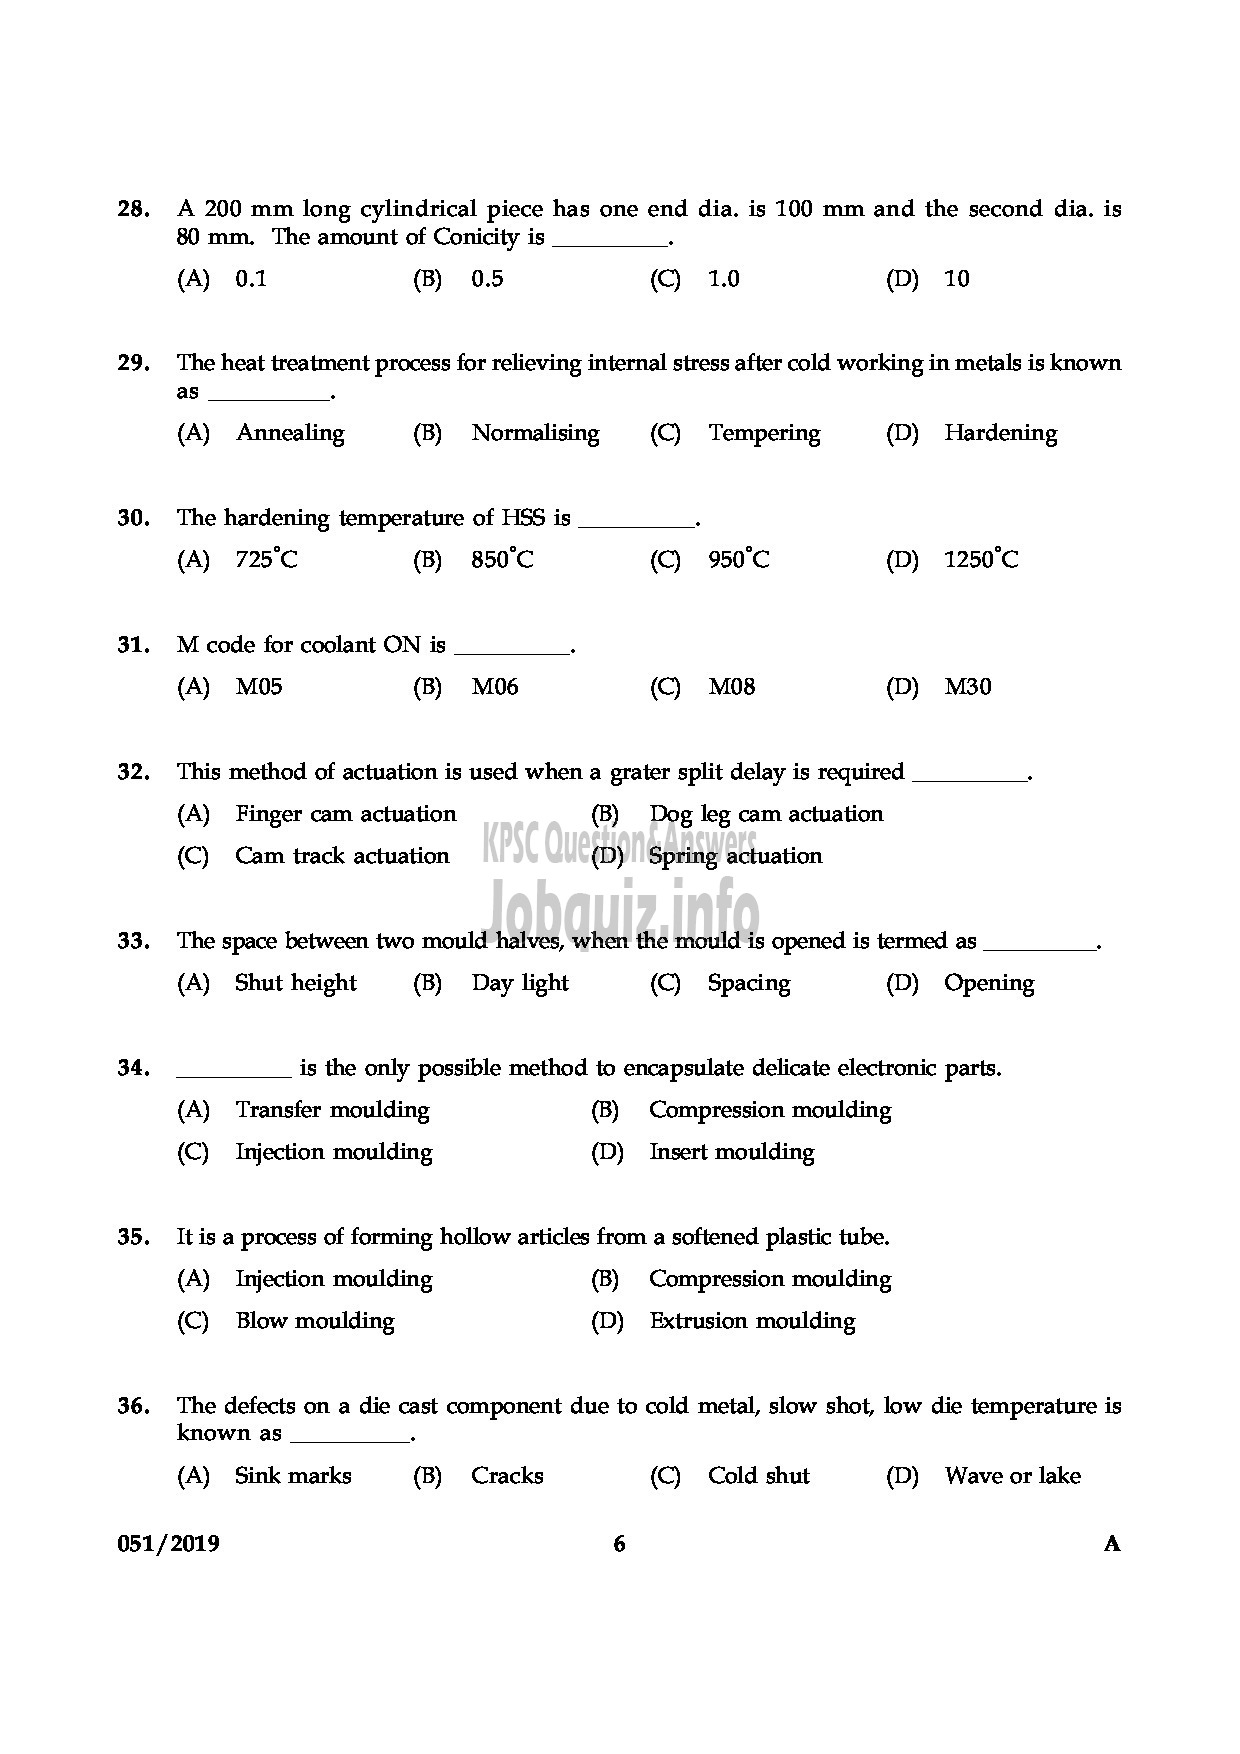 Kerala PSC Question Paper - JUNIOR INSTRUCTOR TOOL & DIE MAKER INDUSTRIAL TRAINING English -6